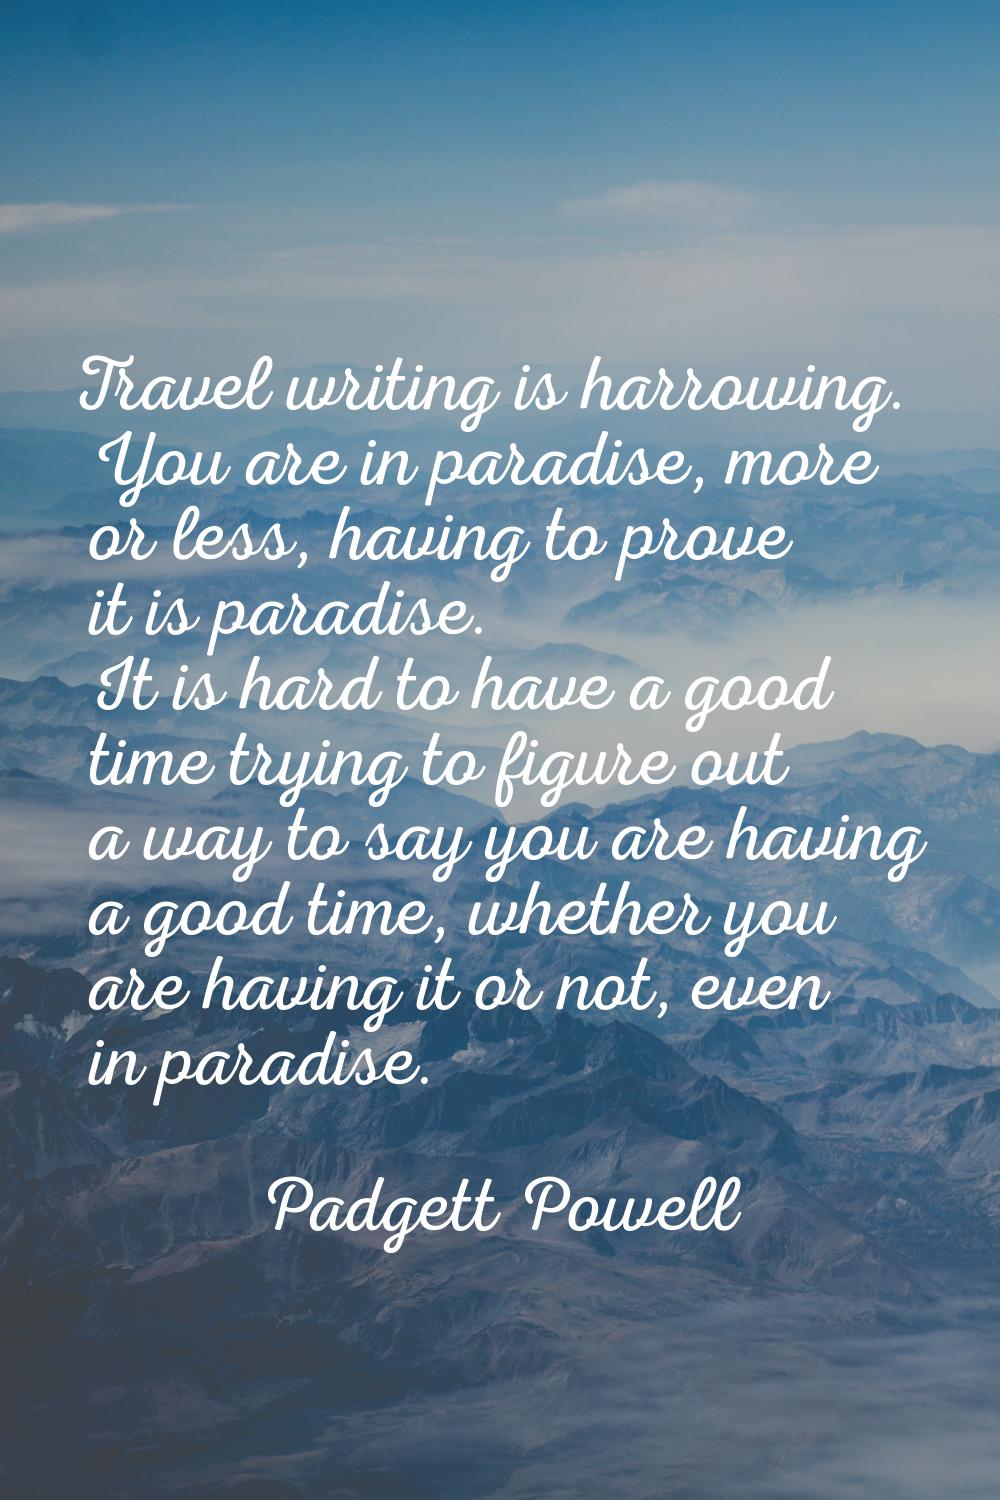 Travel writing is harrowing. You are in paradise, more or less, having to prove it is paradise. It 